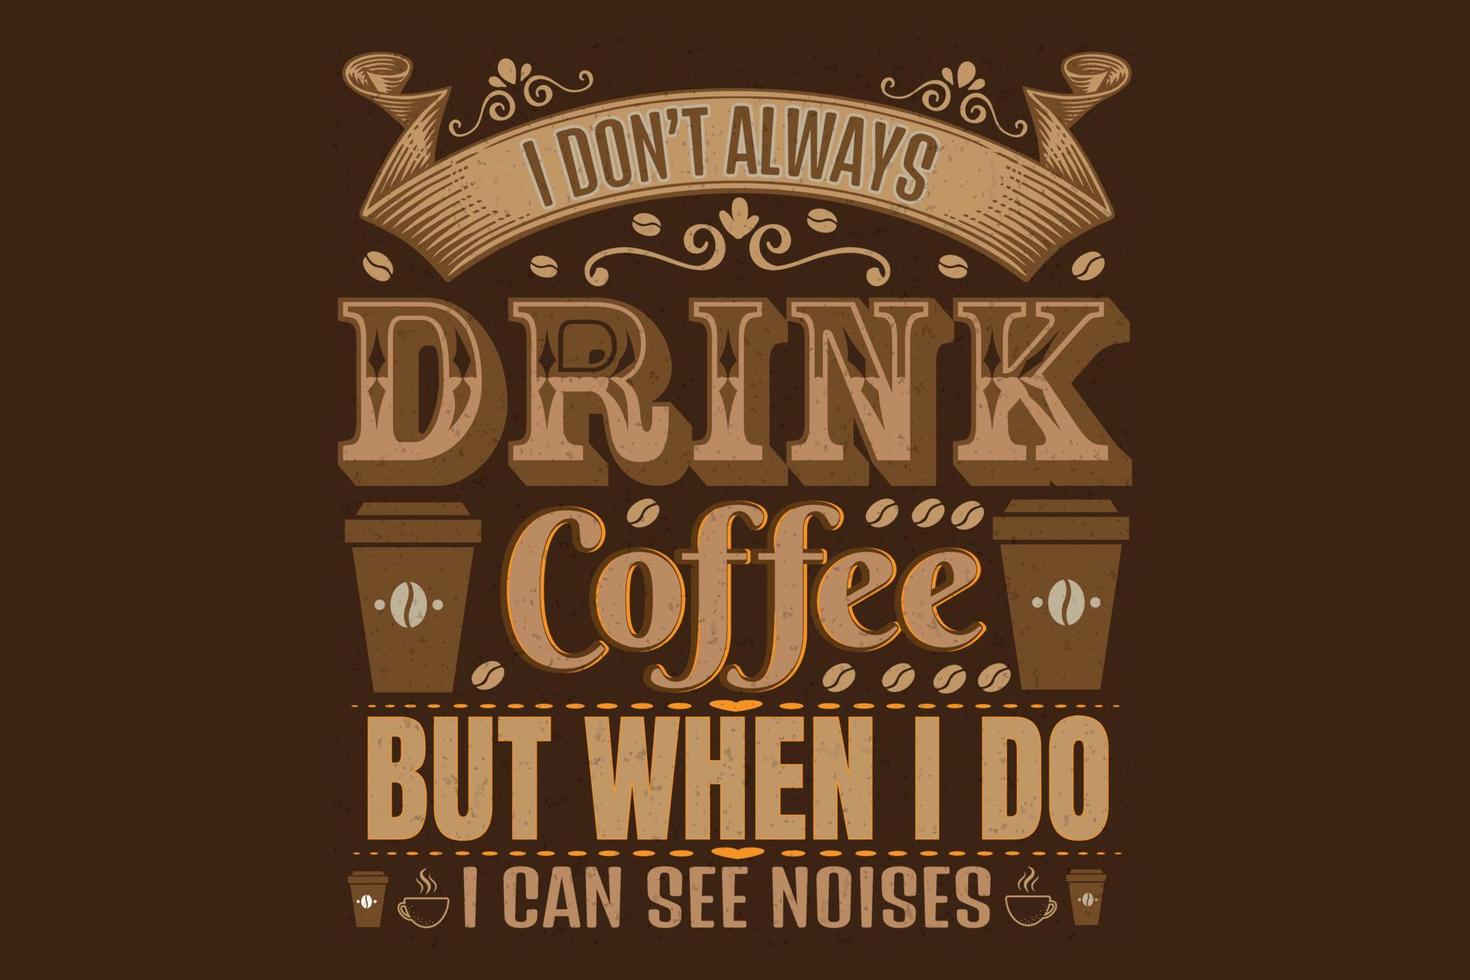 Coffee Quote and Saying. I Don't Always Drink Coffee But When i do I Can See Noisess vector